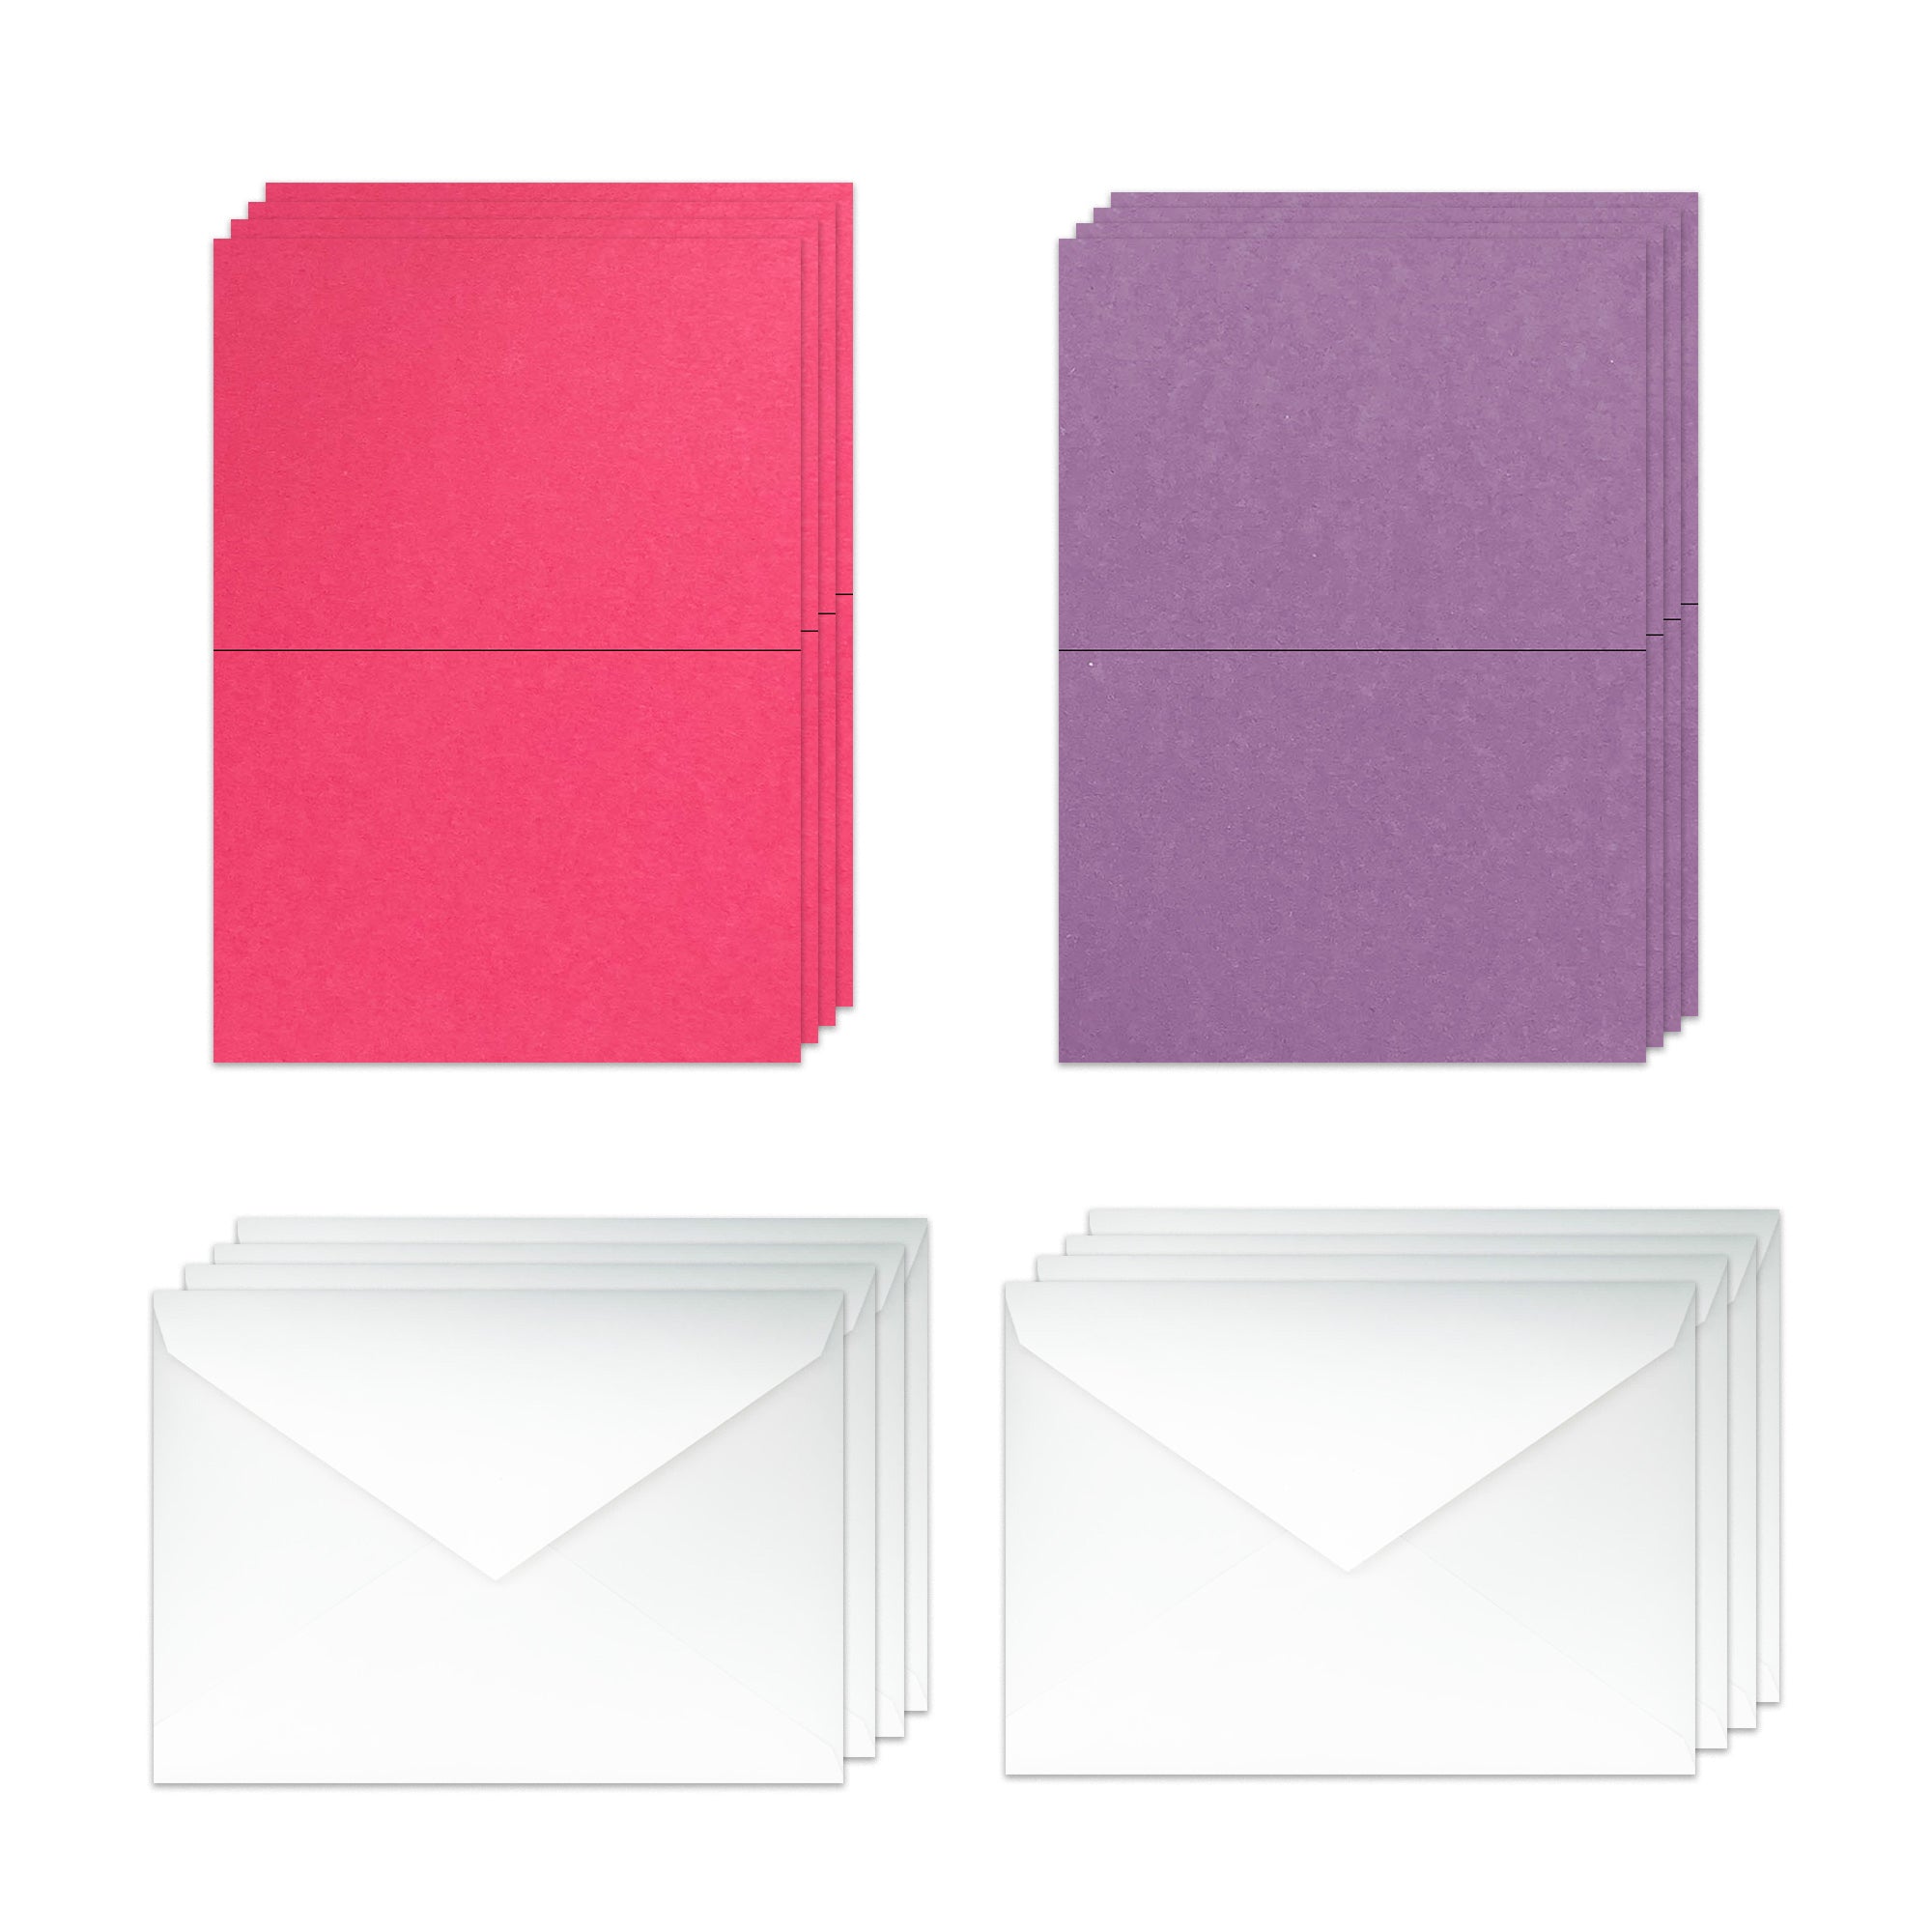 Discount A2 Folded Card Stock for DIY cards and invitations